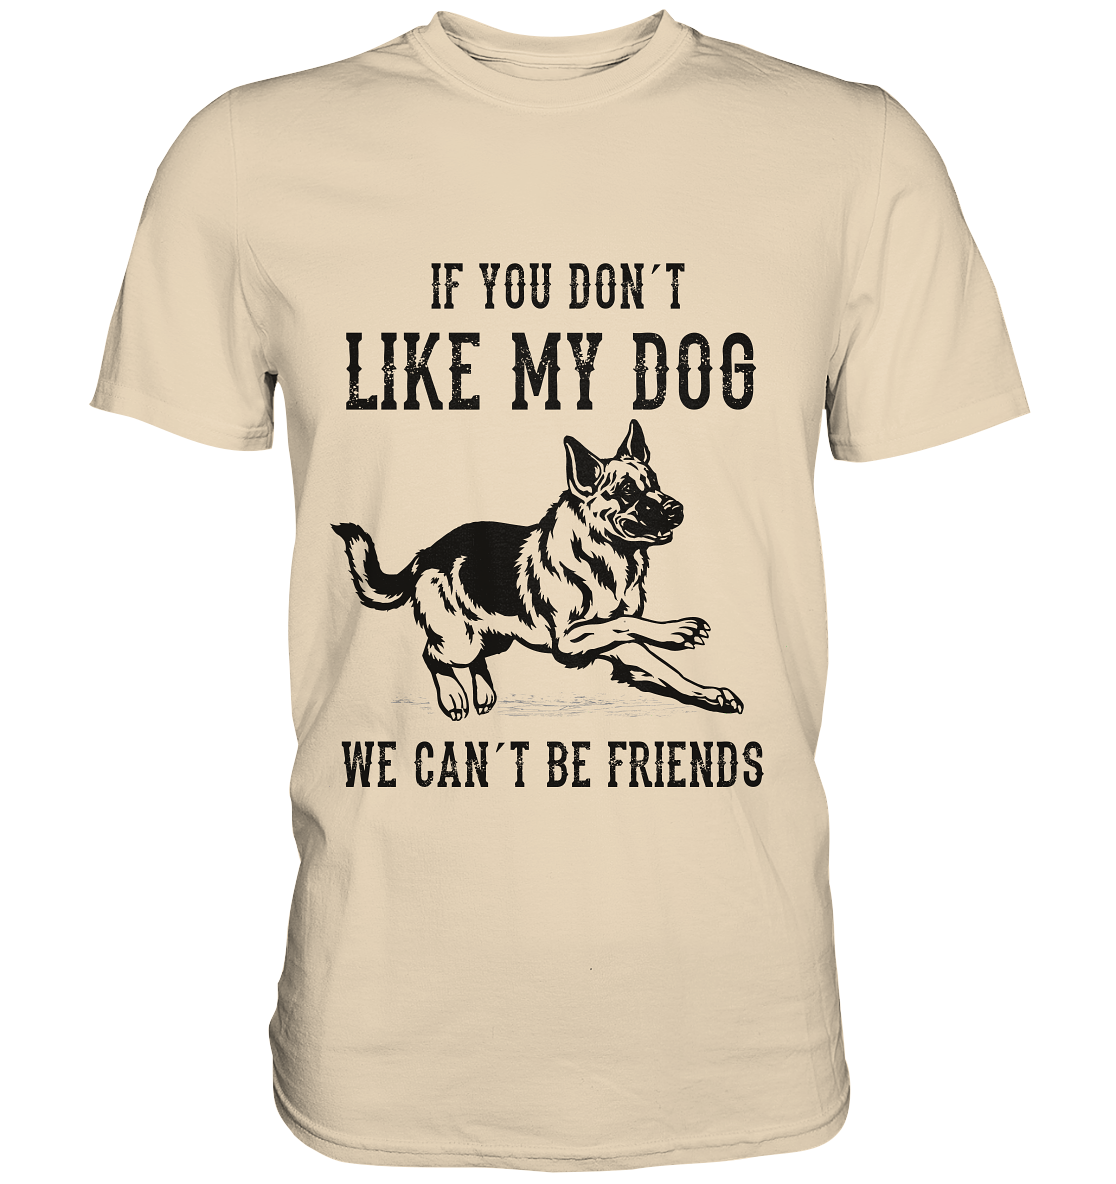 If you don´t like my dog, we can´t be friends. Schäferhund - Premium Shirt